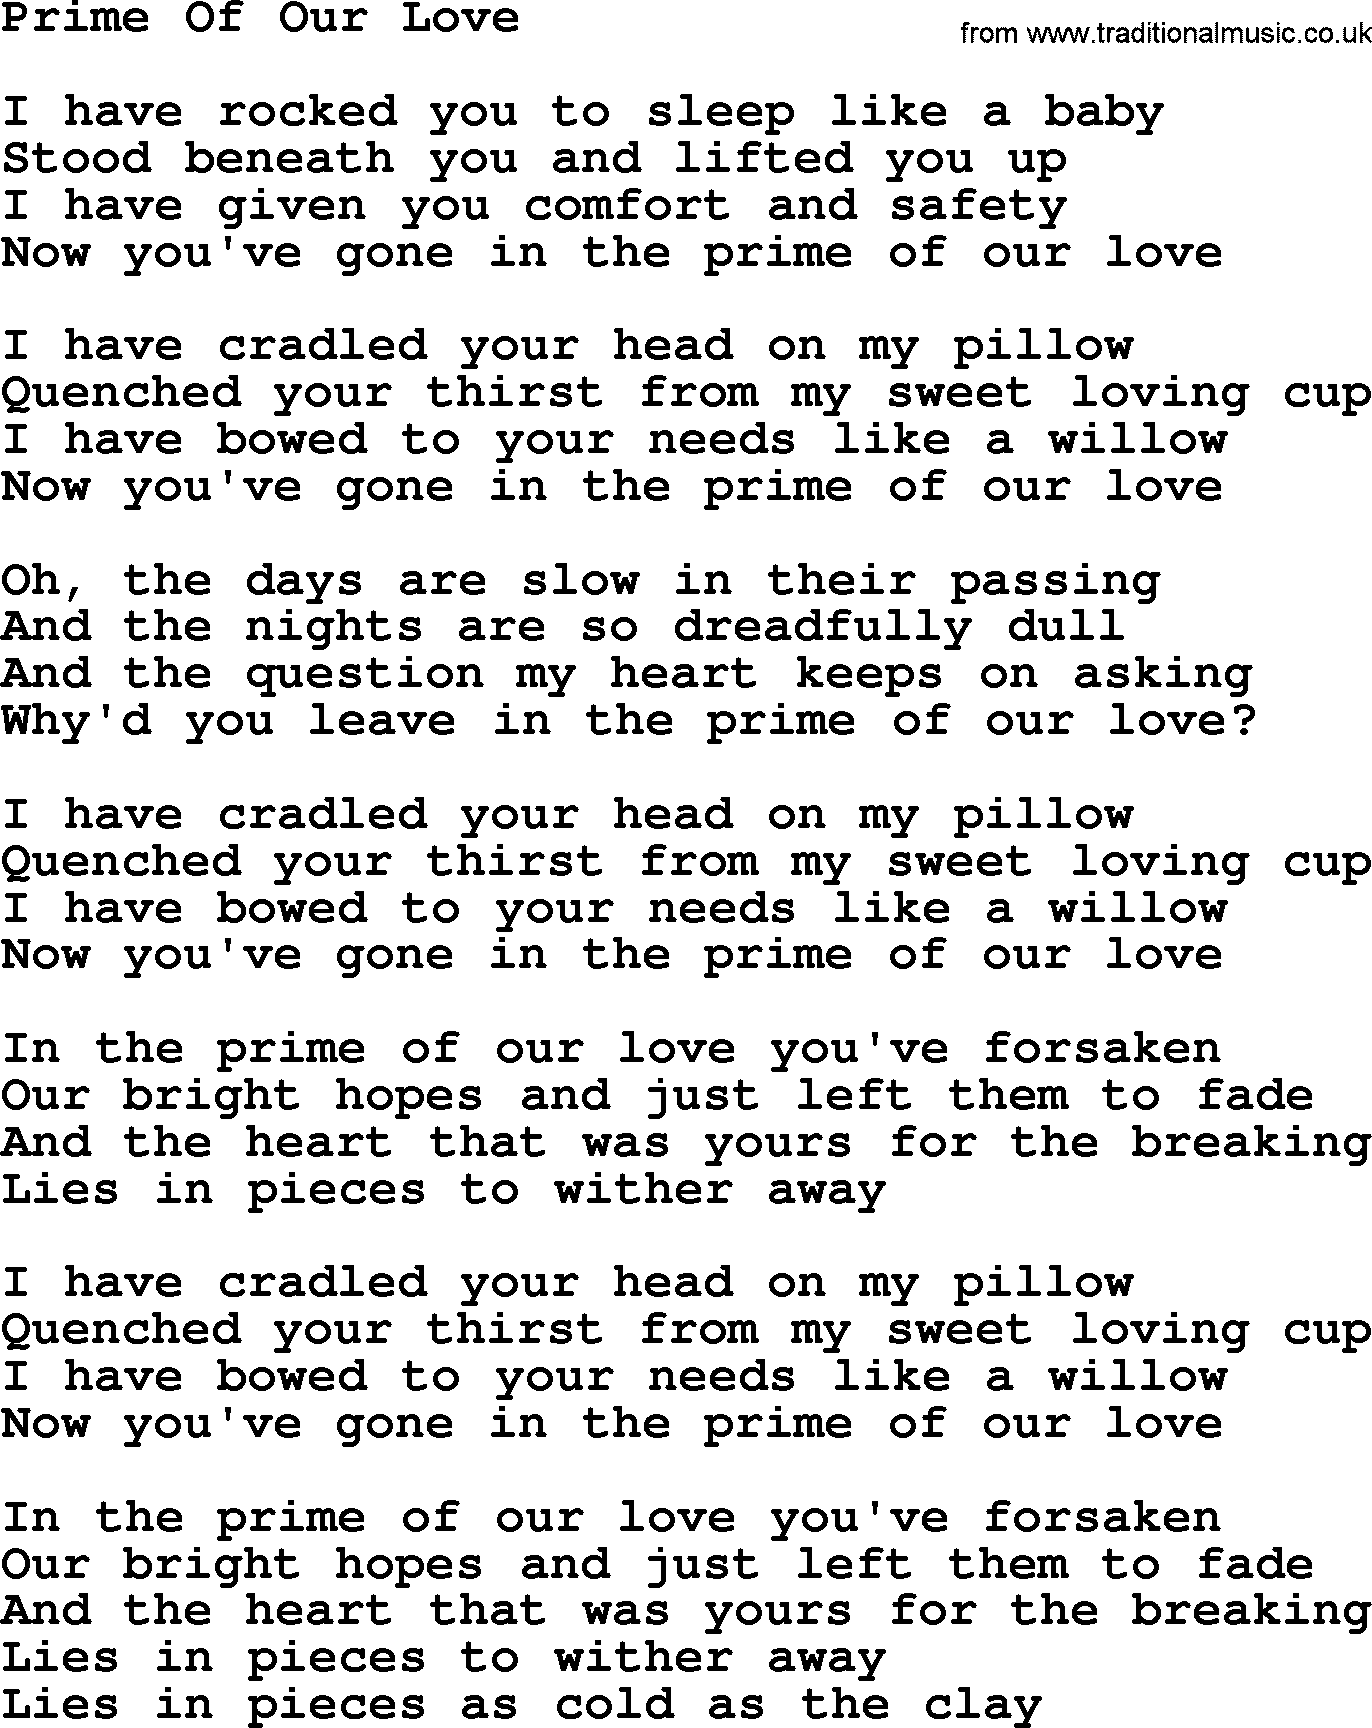 Dolly Parton song Prime Of Our Love.txt lyrics